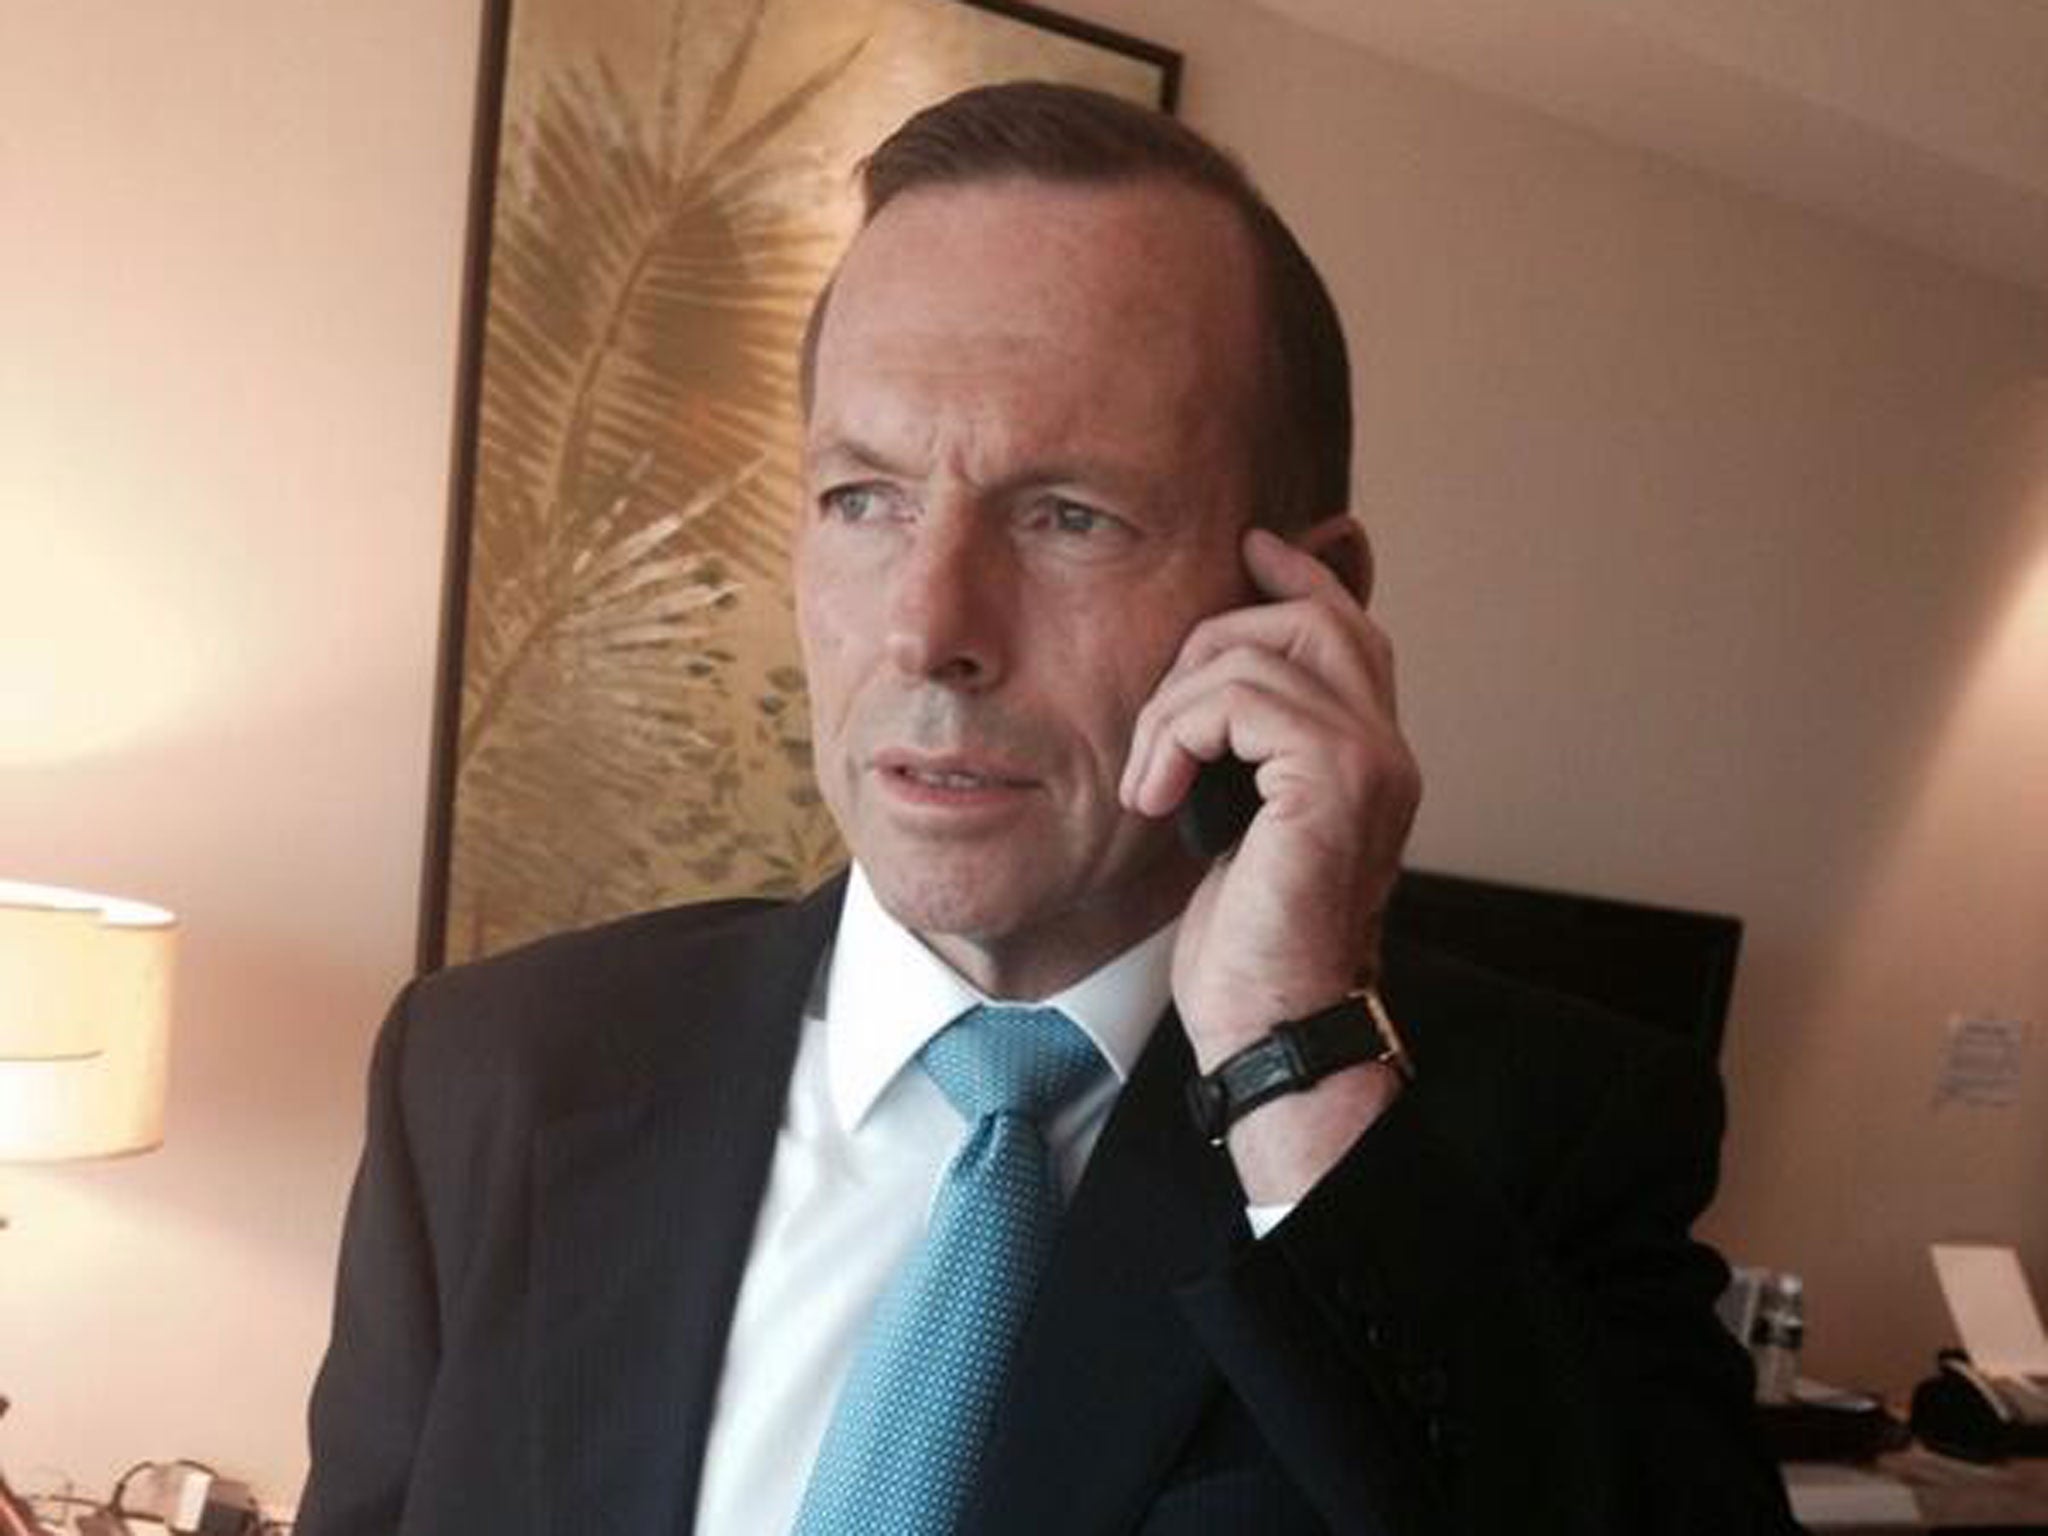 The prime minister looks ready for business in the image posted on his Twitter account